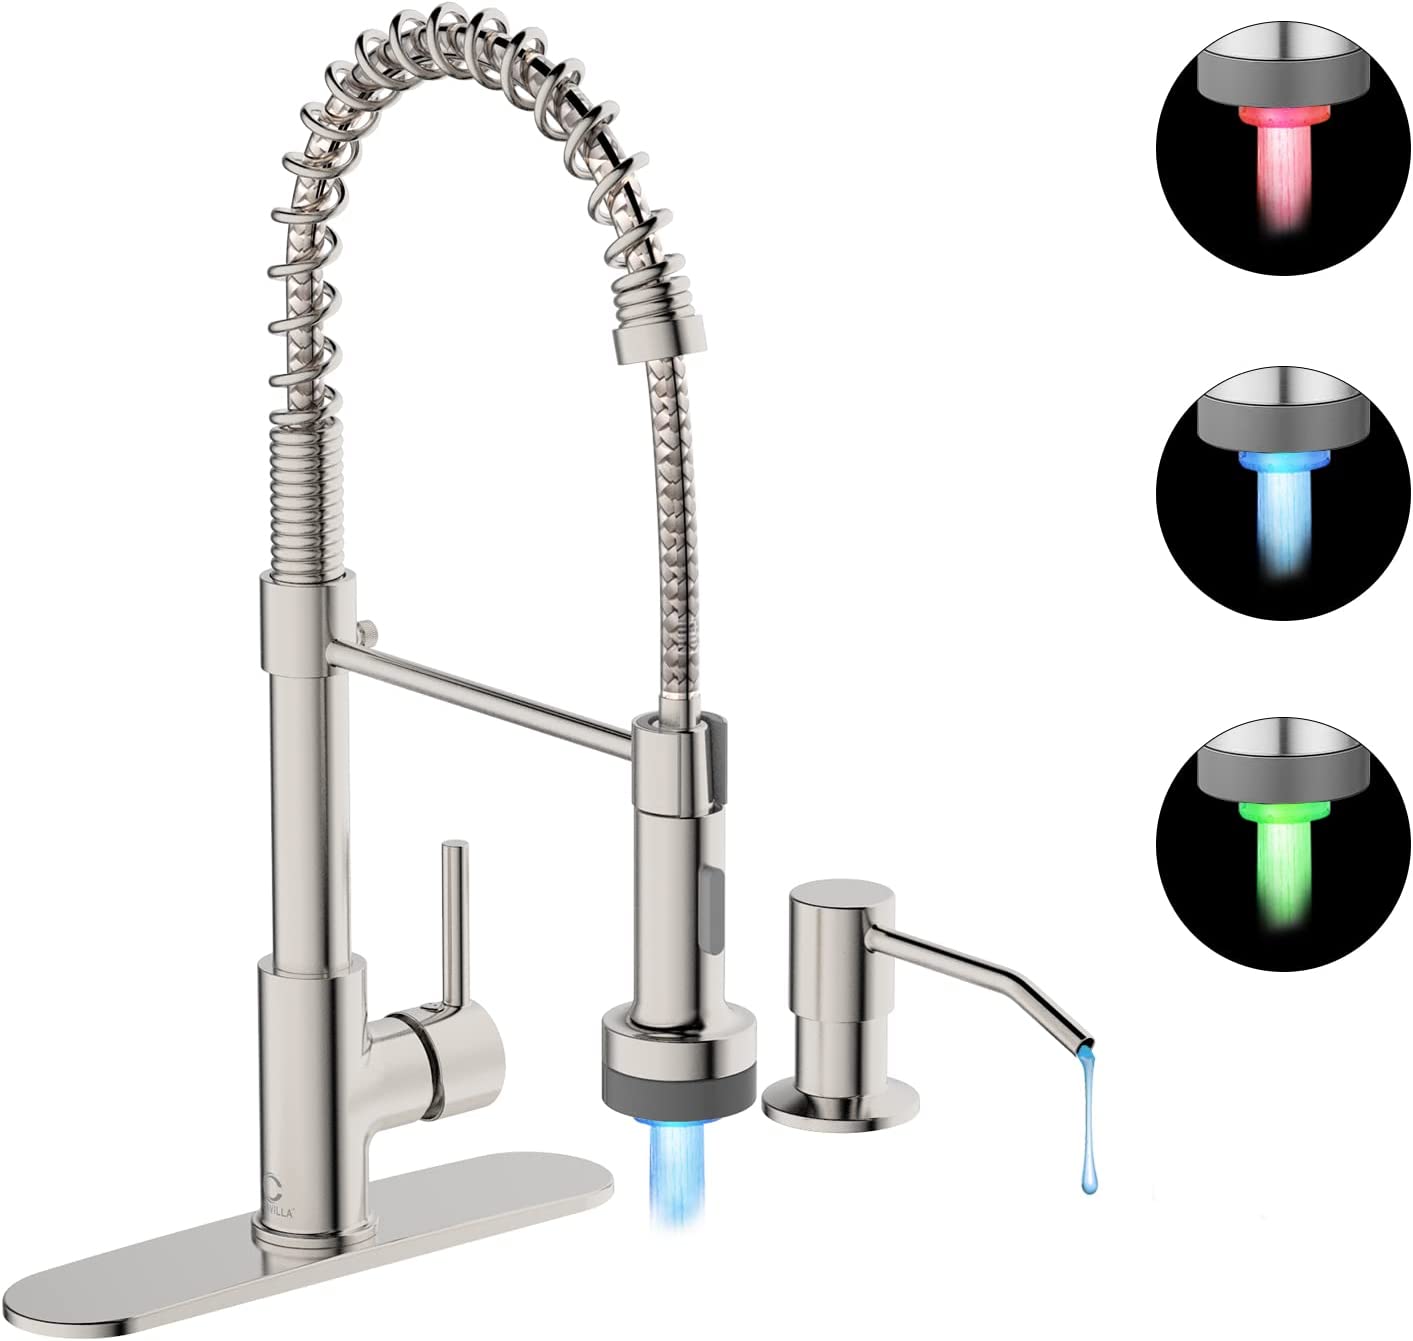 Kitchen Faucet with LED Light,Kitchen Faucet with Soap Dispenser,Faucet for Camper Farmhouse RV Kitchen Sink,Single Handle Stainless Steel Kitchen Sink Faucets with Pull Down Sprayer,Nickel Brushed - image 1 of 17